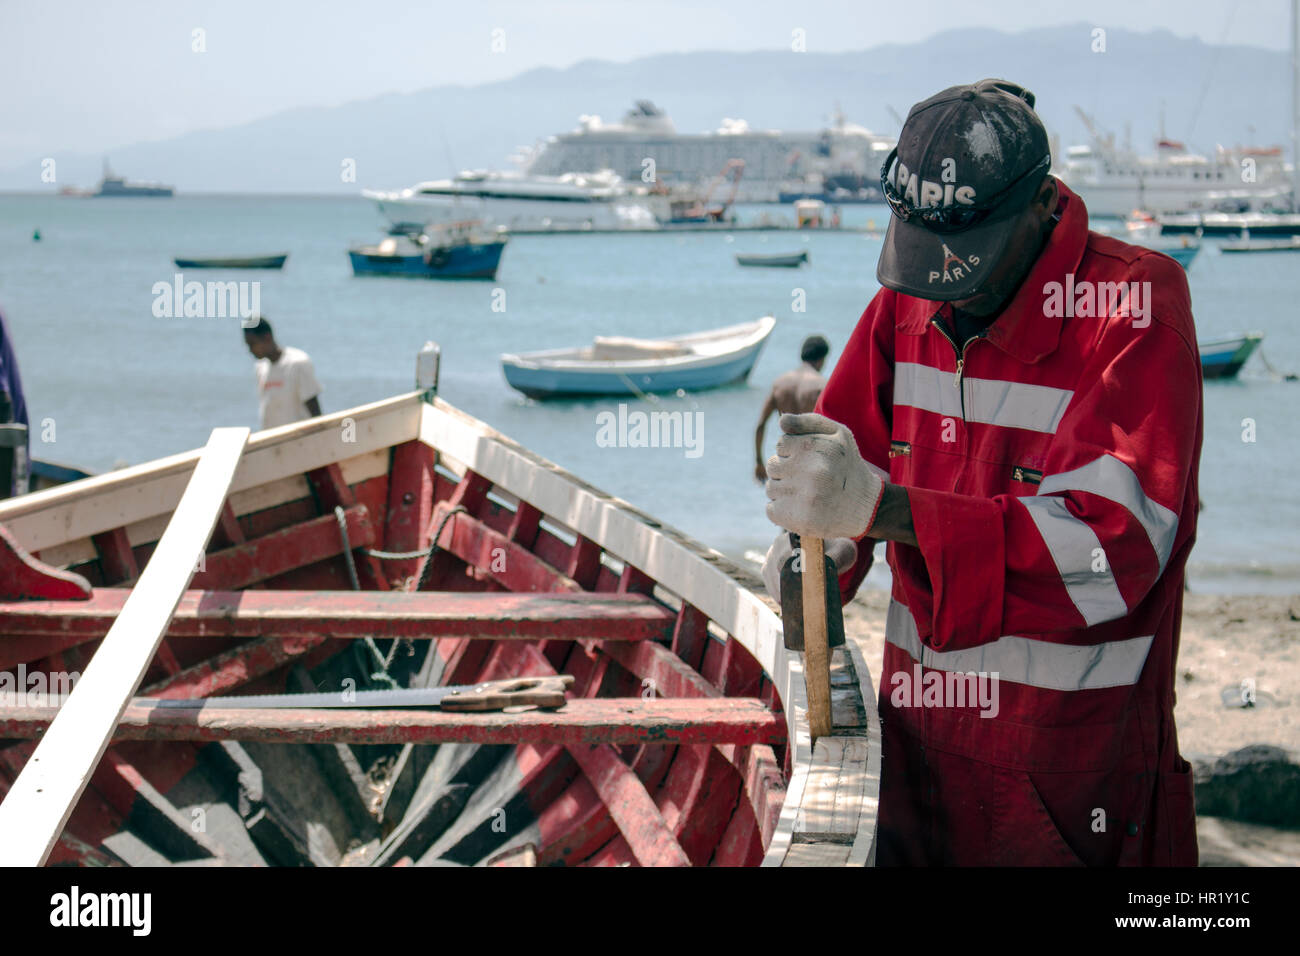 A worker carpenter is repairing a wooden boat wearing overall and gloves. Stock Photo